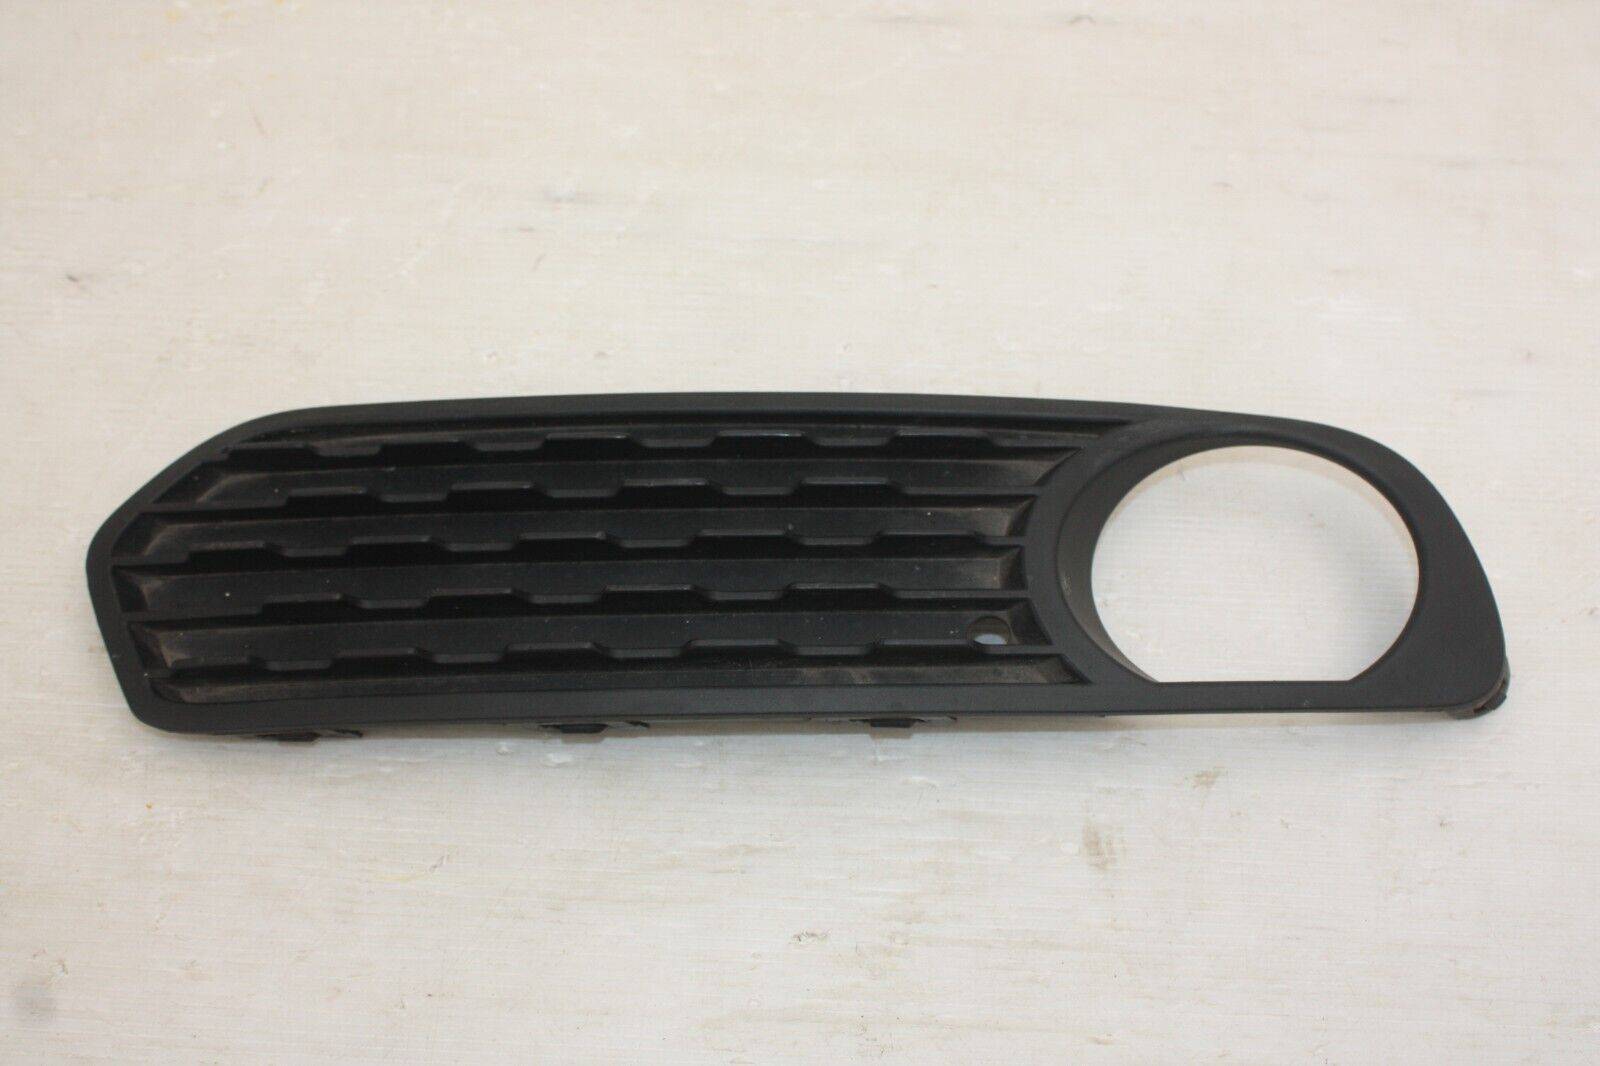 BMW 1 Series F20 Front Bumper Right Side Grill 2012 TO 2015 51127245870 Genuine 175662364235